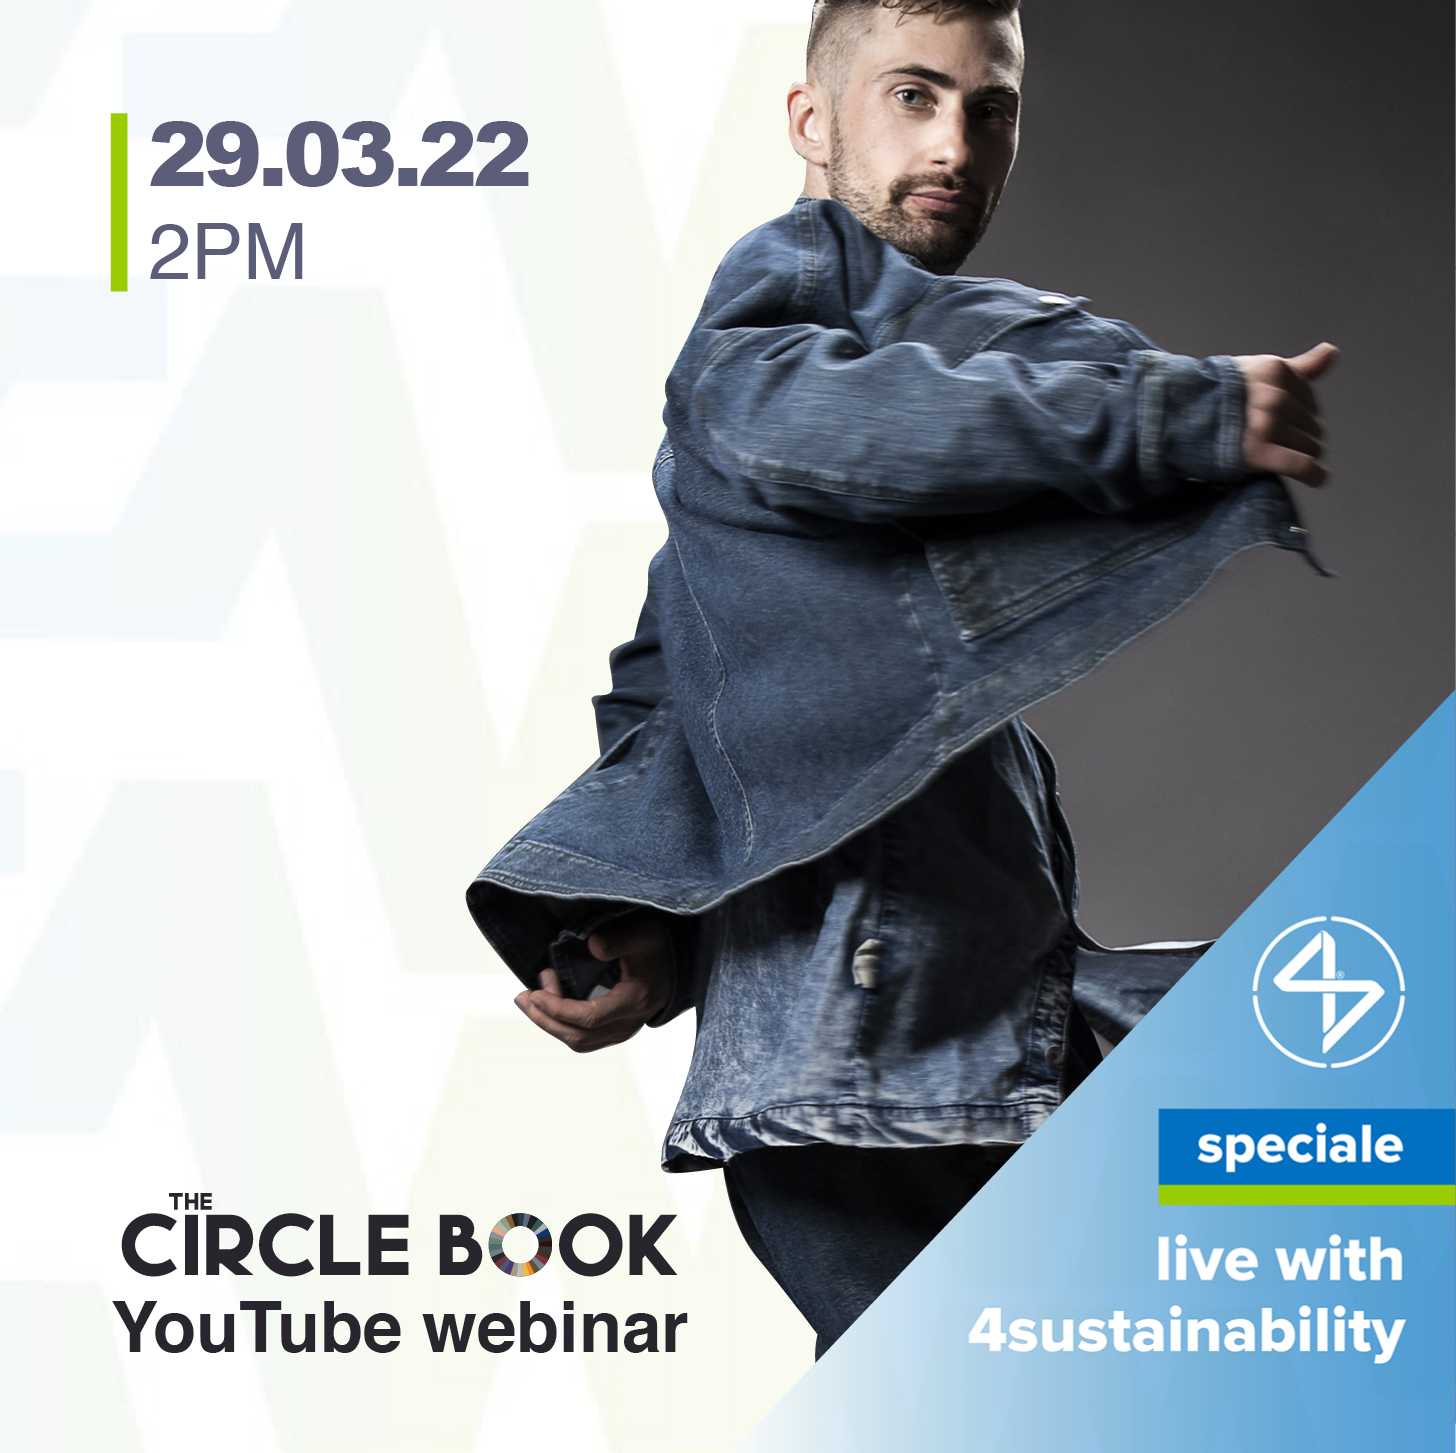 The Circle Book 2 live 4sustainability